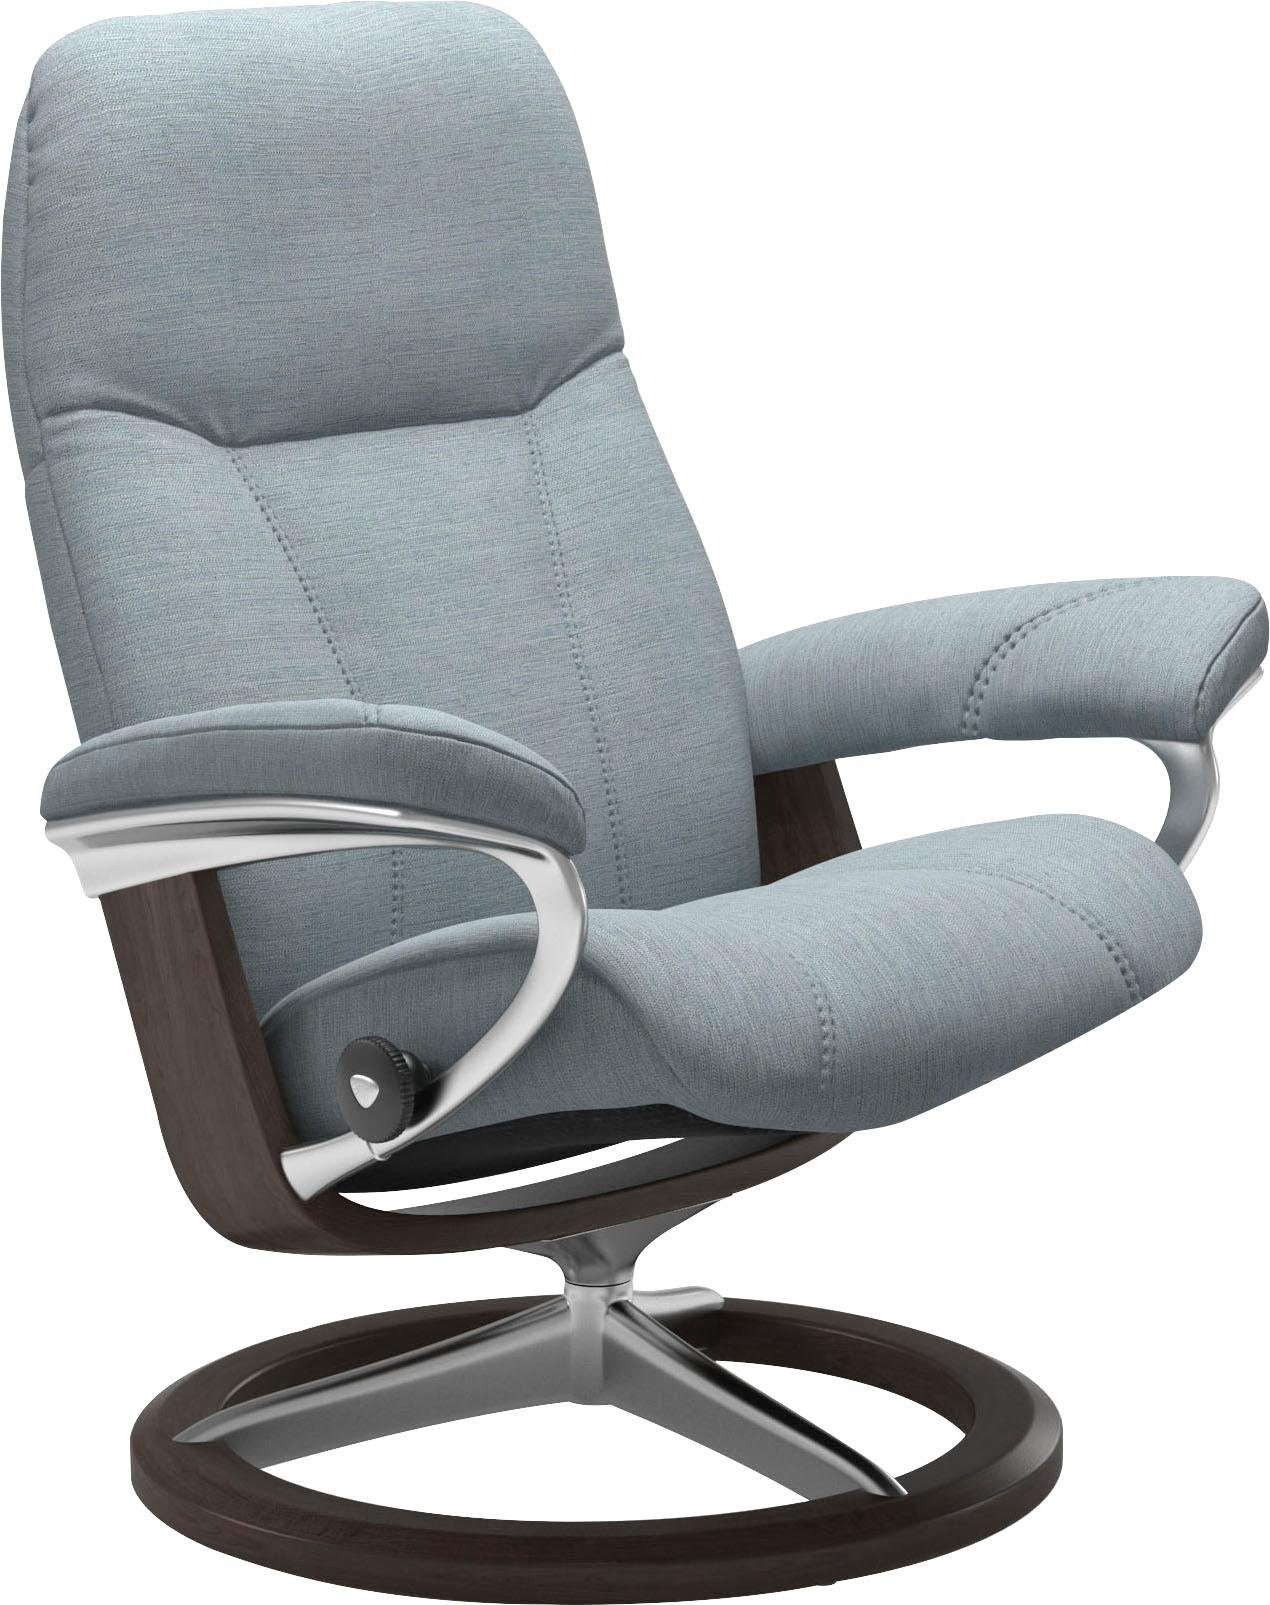 Stressless® Relaxsessel Consul, Größe Base, Gestell Signature Wenge mit L